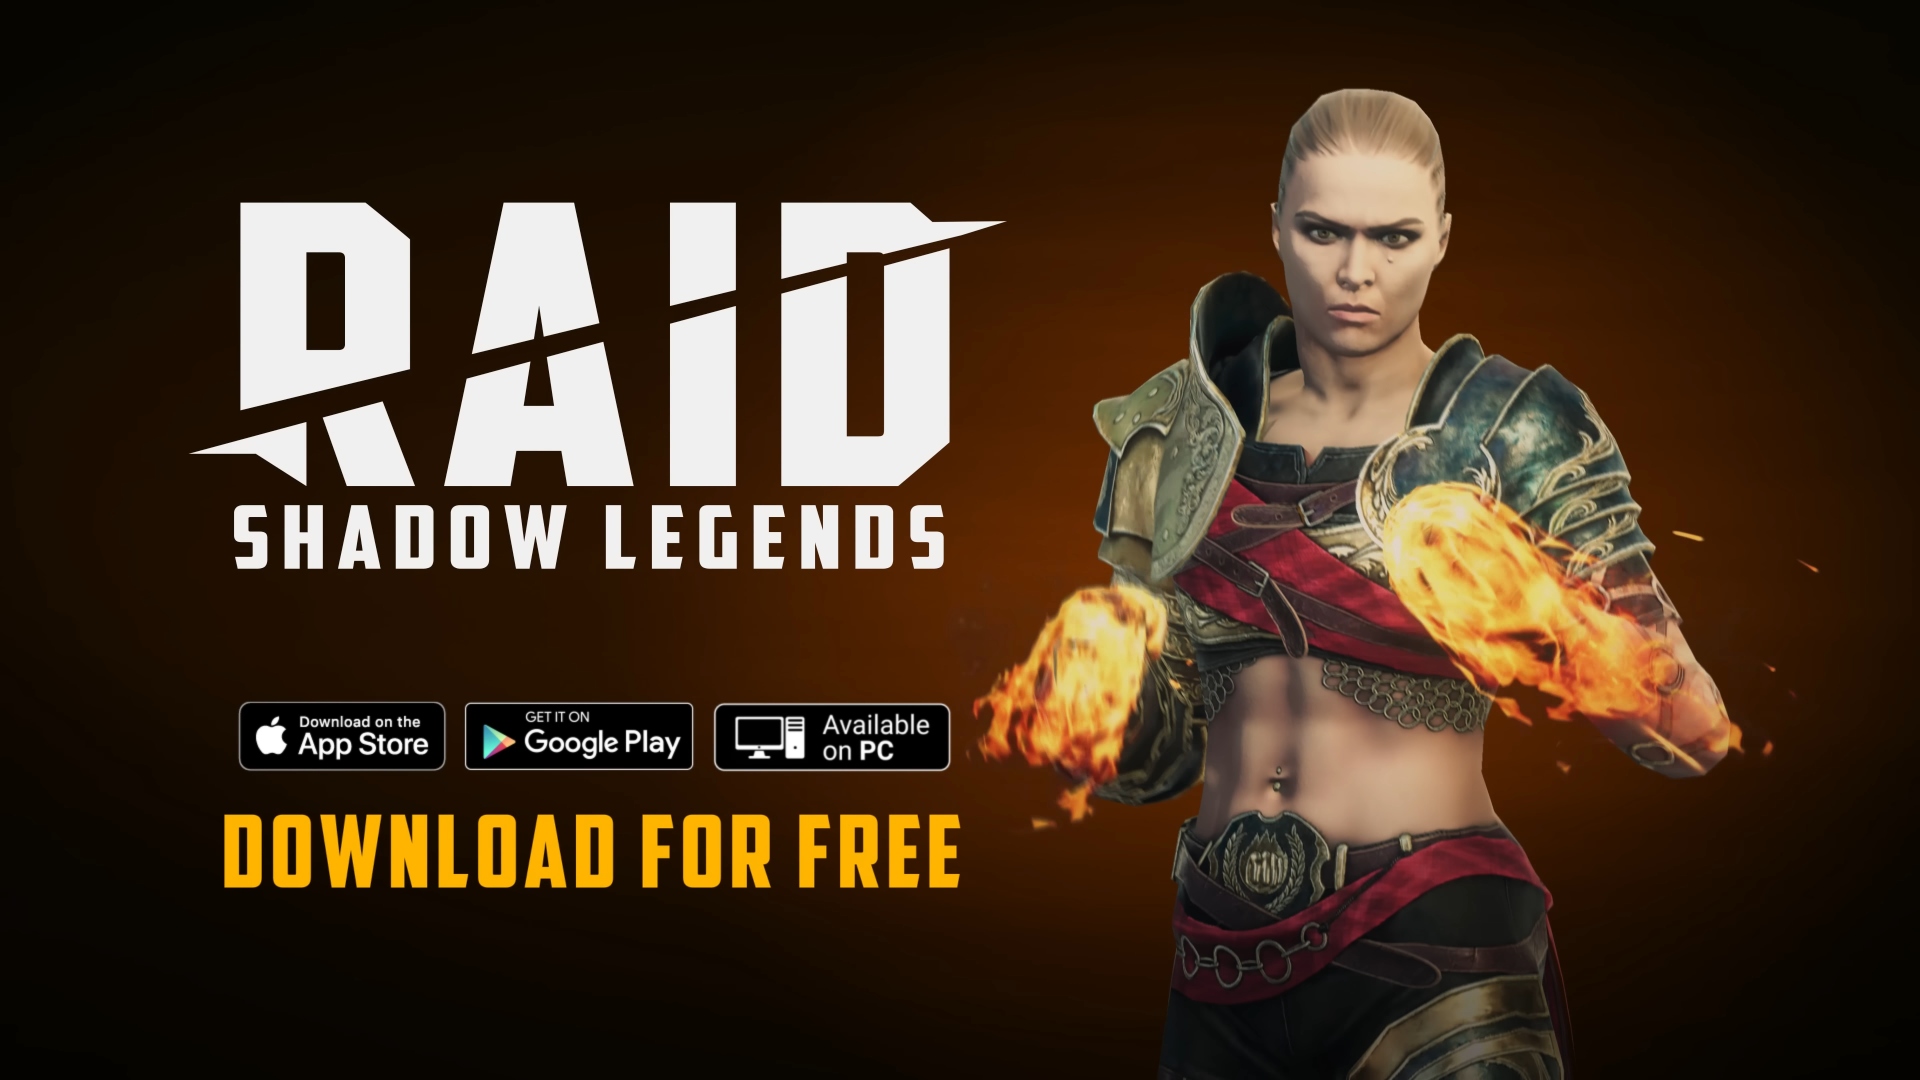 Raid: Shadow Legends promo with the game's logo, an image of Ronda Rousey, little images to indicate that it is playable on Android, iPhone, and PC. Below that, it says "Download for free"